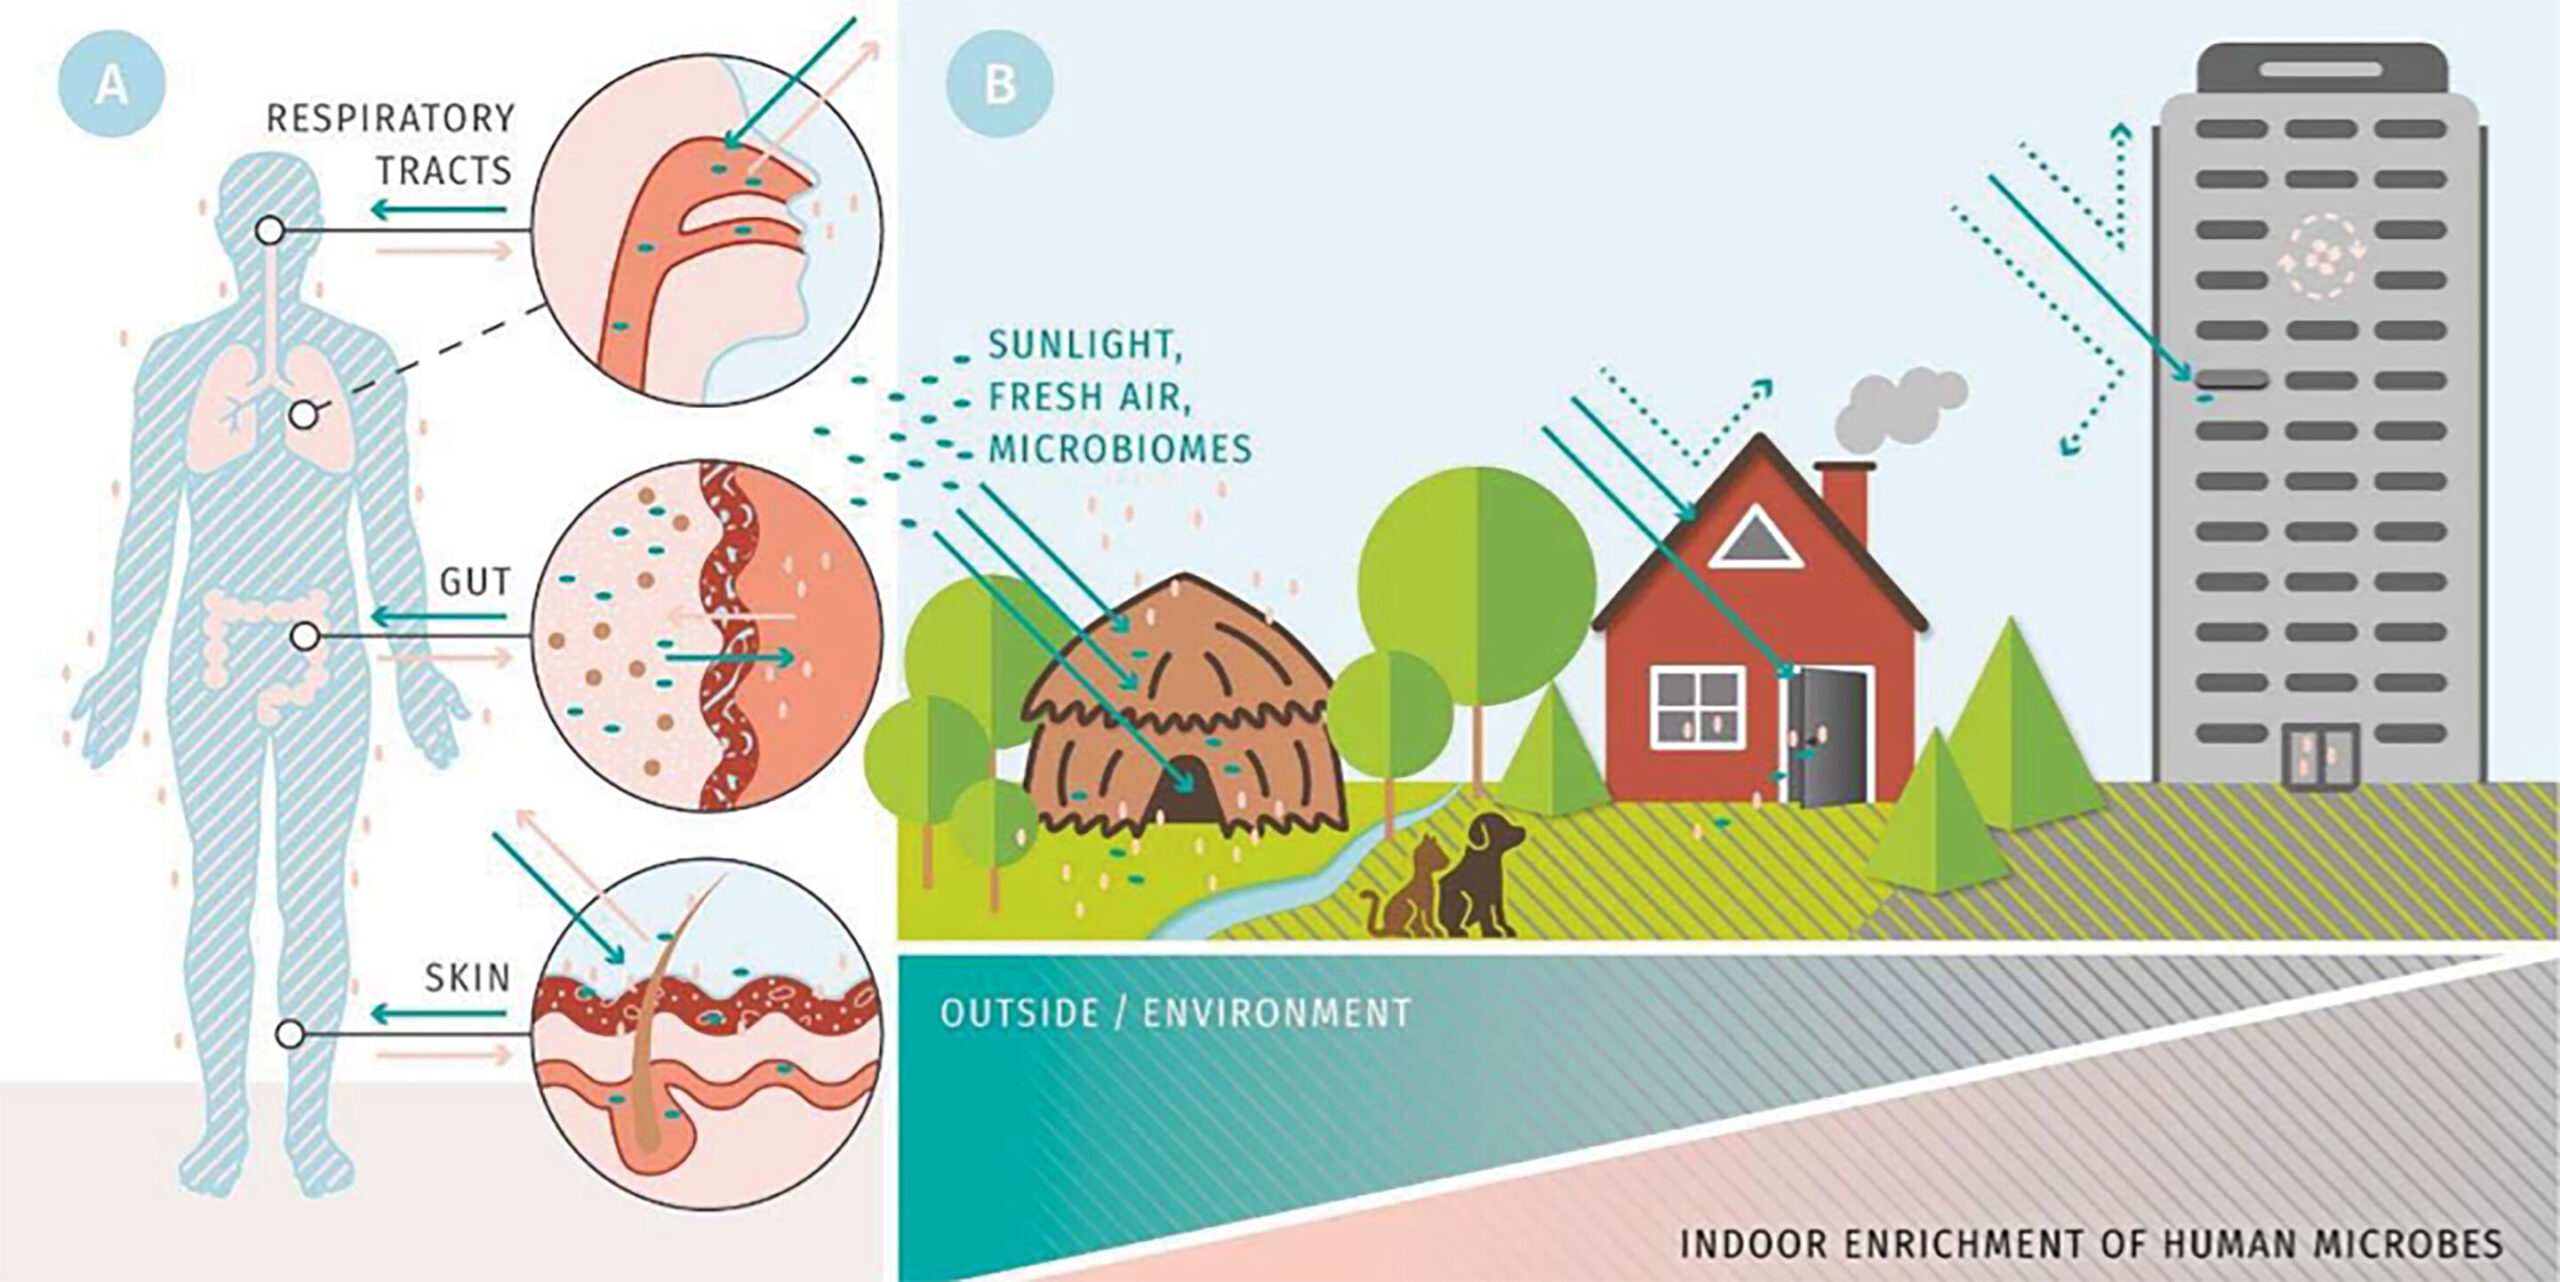 How buildings influence the microbiome and human health